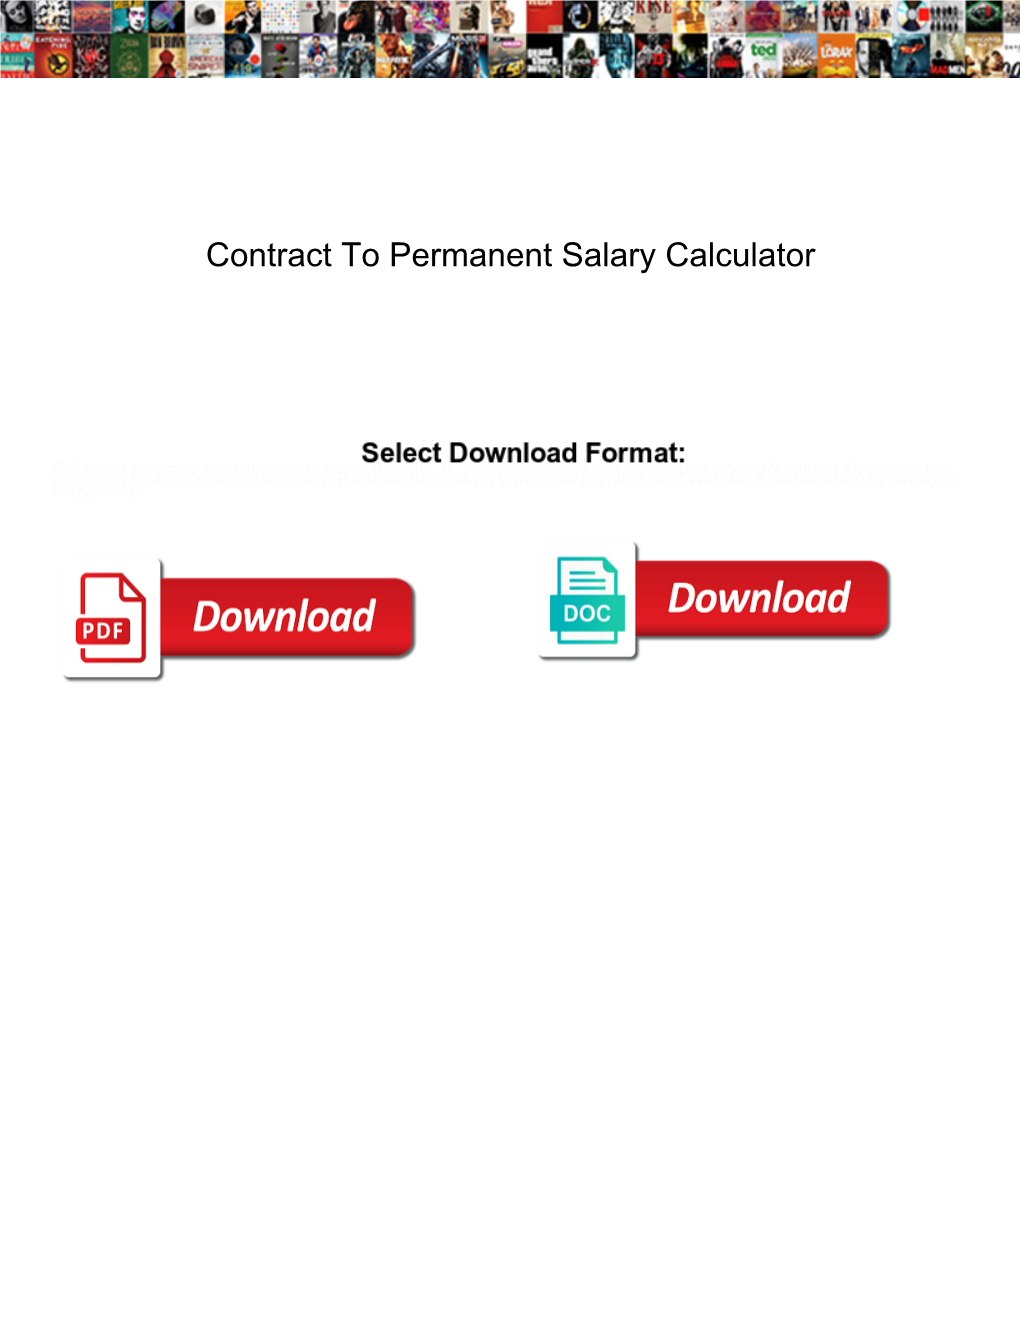 Contract to Permanent Salary Calculator